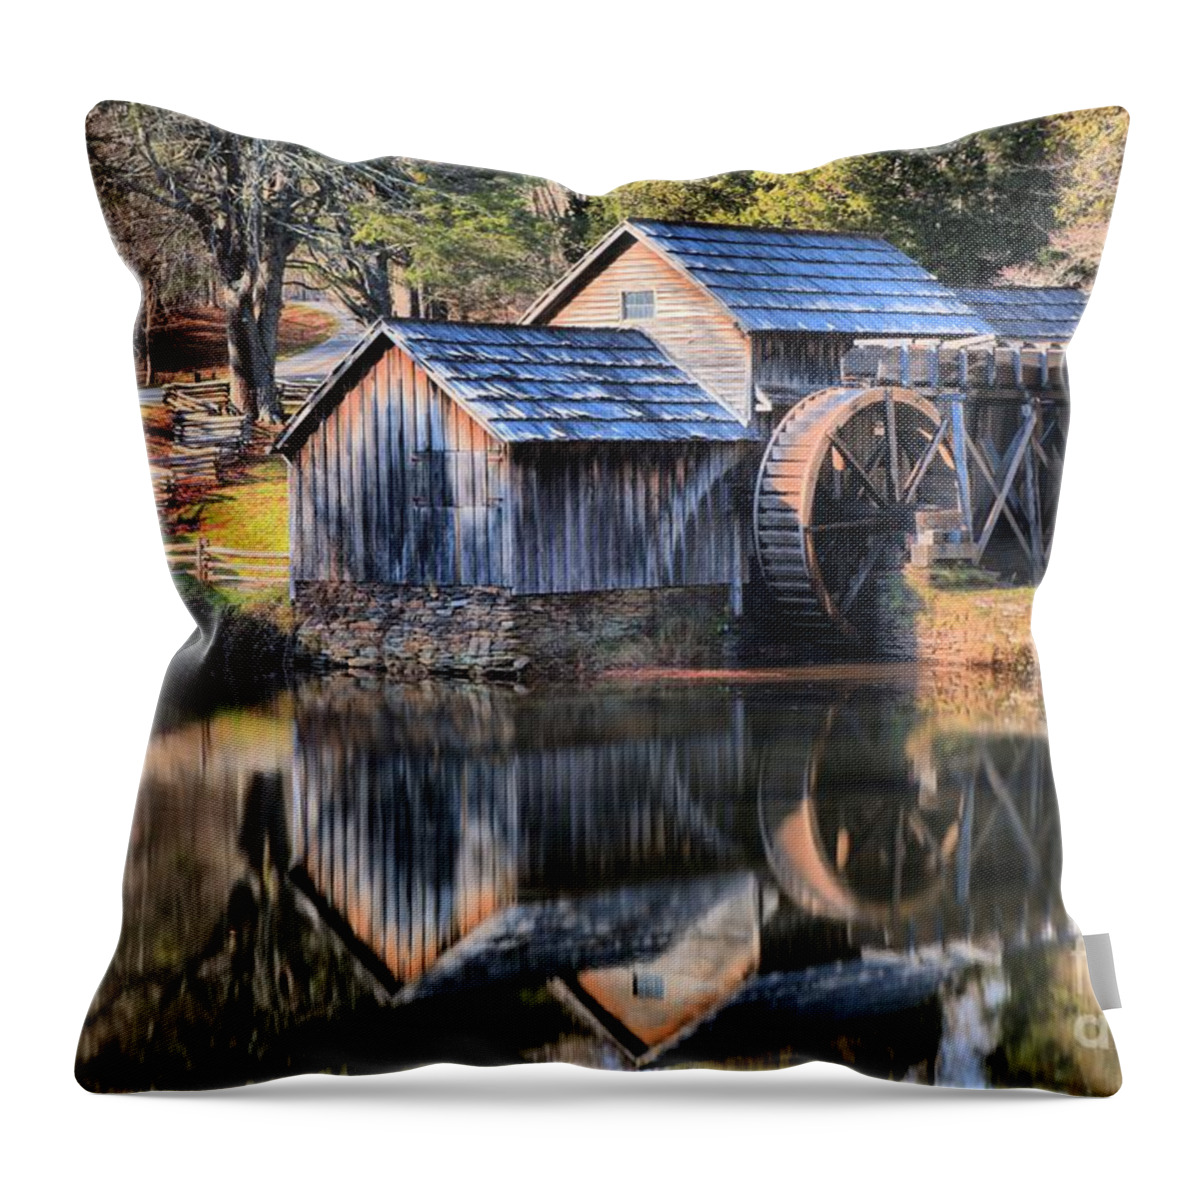 Mabry Mill Throw Pillow featuring the photograph Blue Ridge Parkway Mabry Mill by Adam Jewell